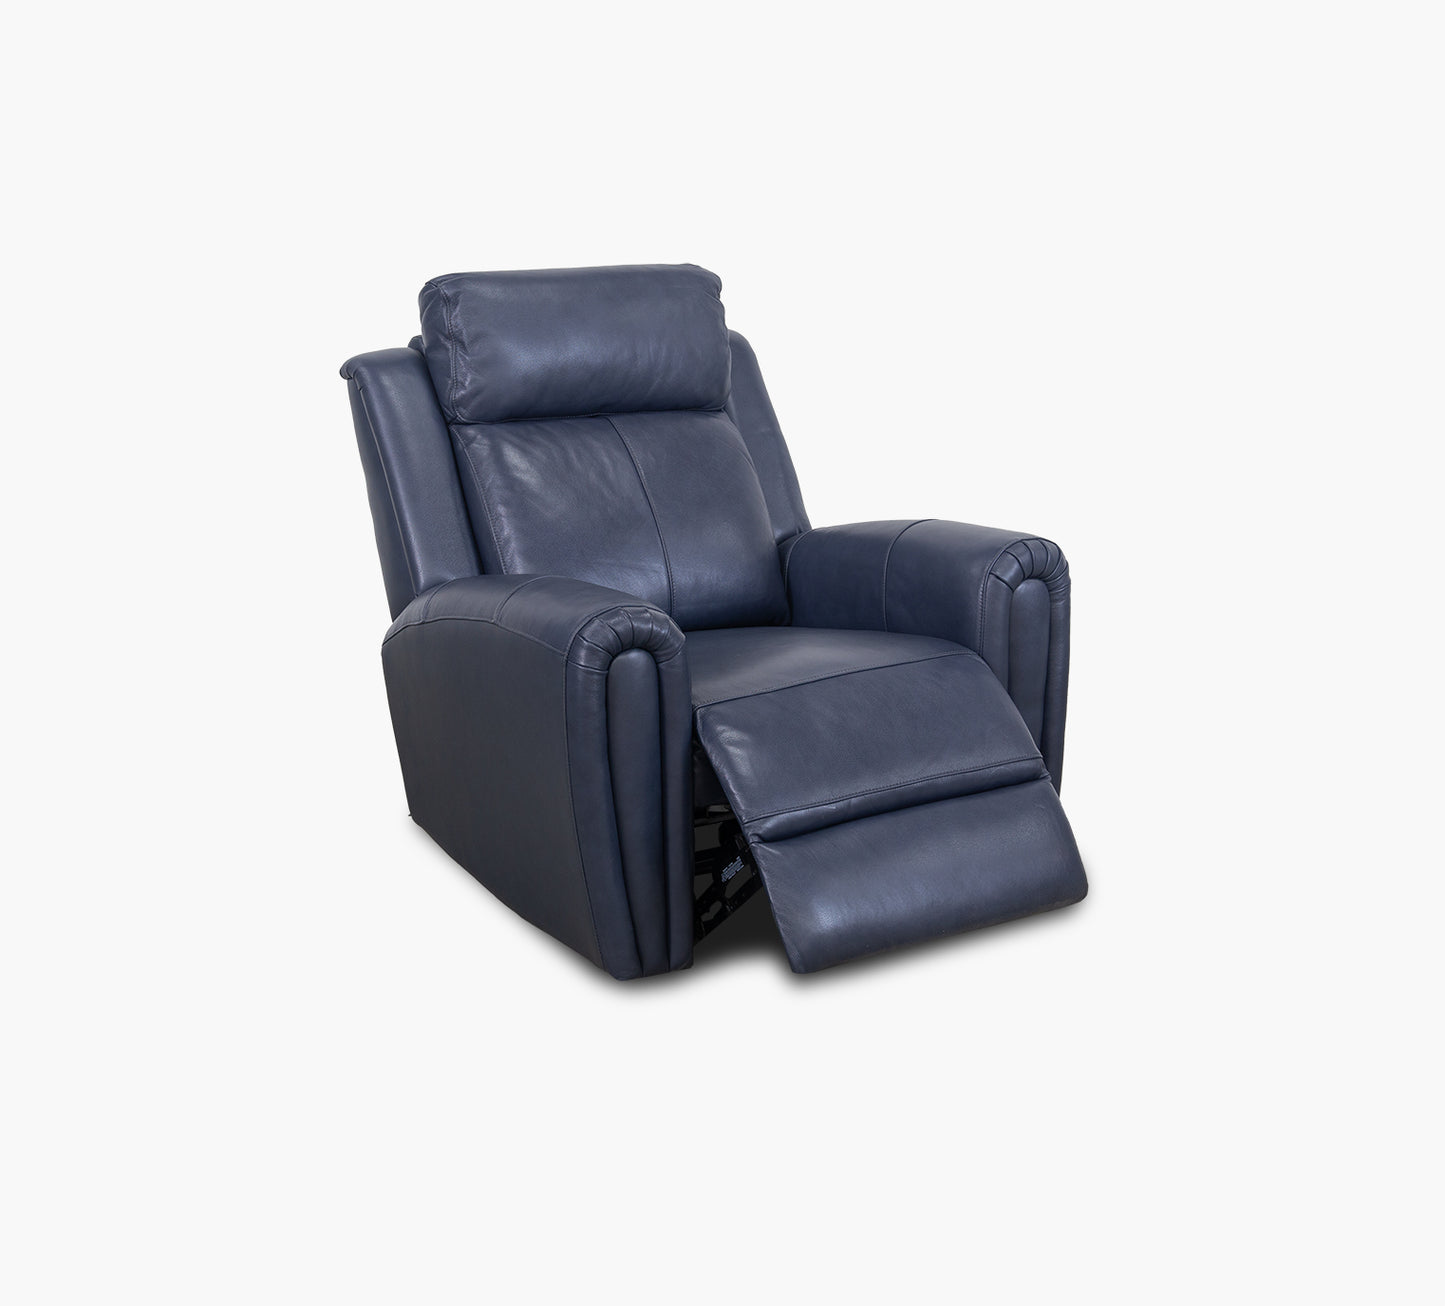 Jonathan Blue Leather Dual Power Glider Recliner